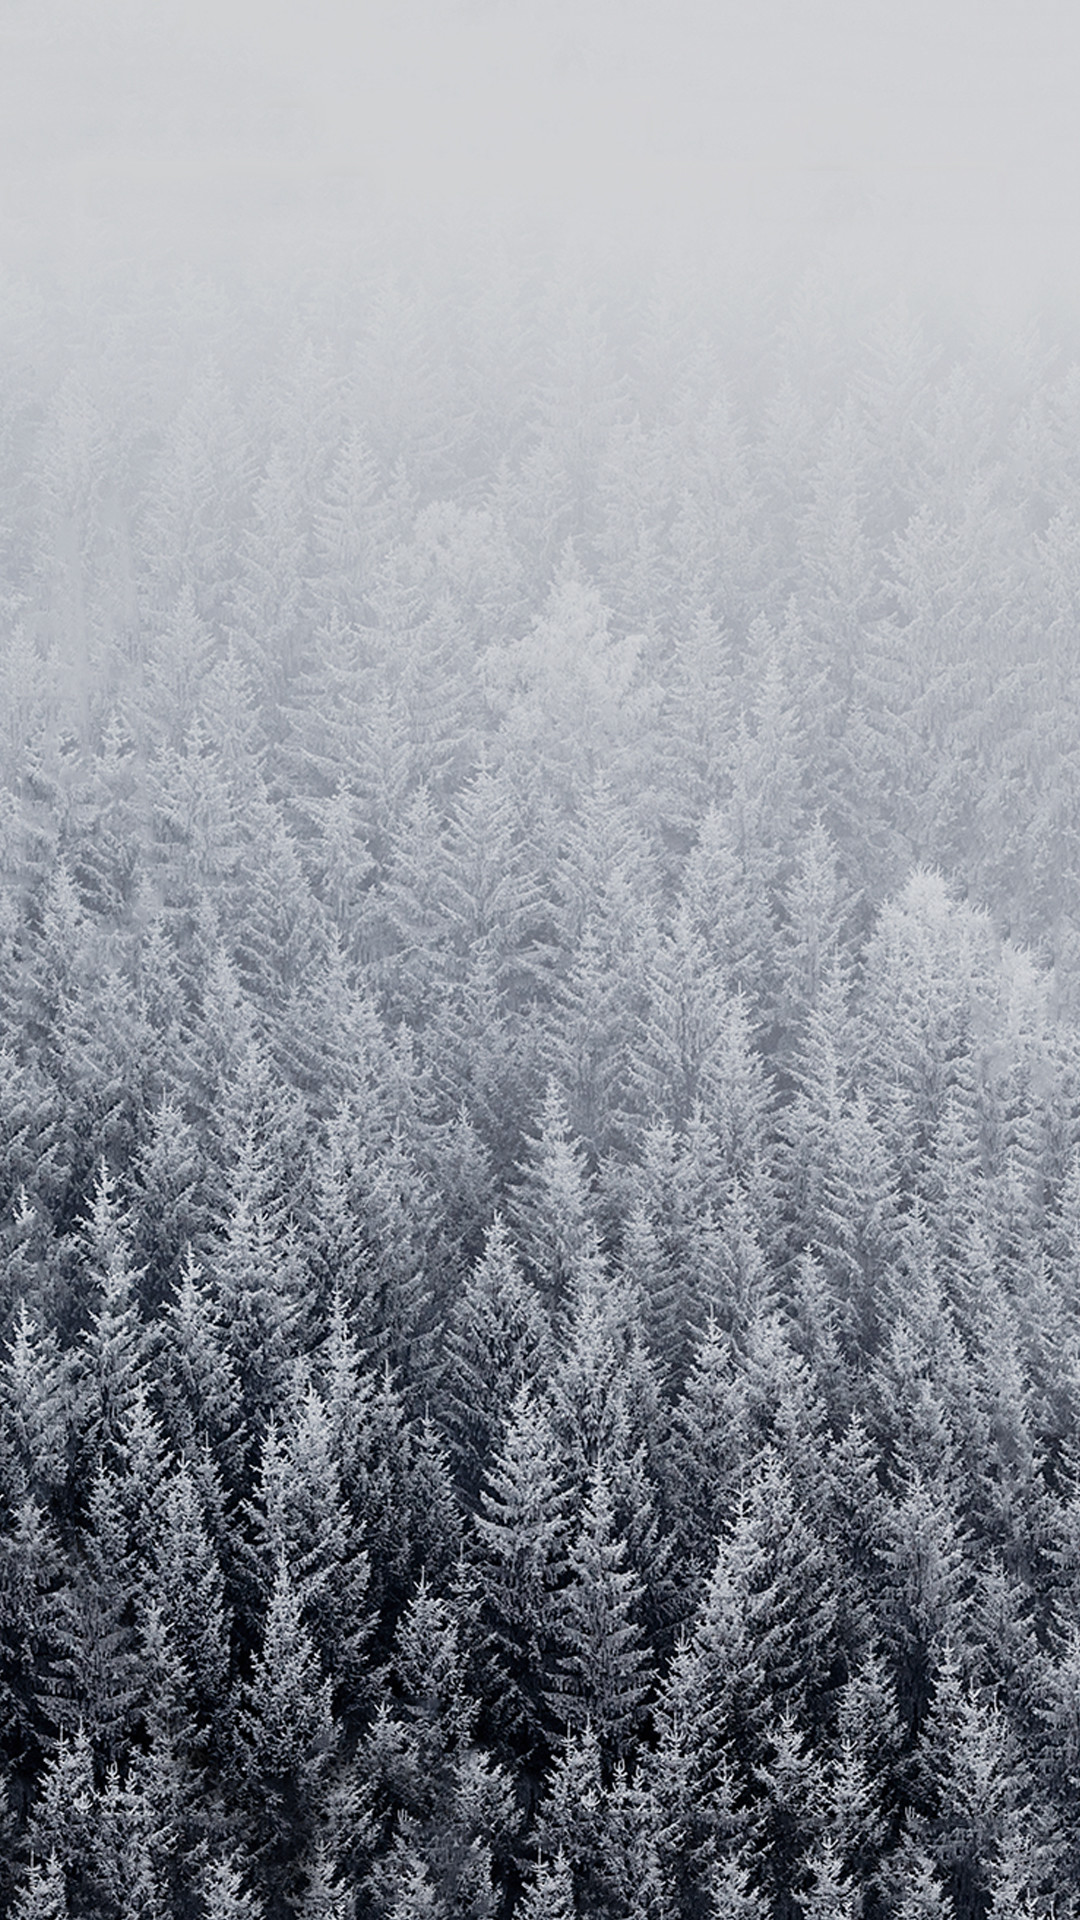 File attachment for Apple iPhone 6 Plus Wallpaper – winter with snowy trees